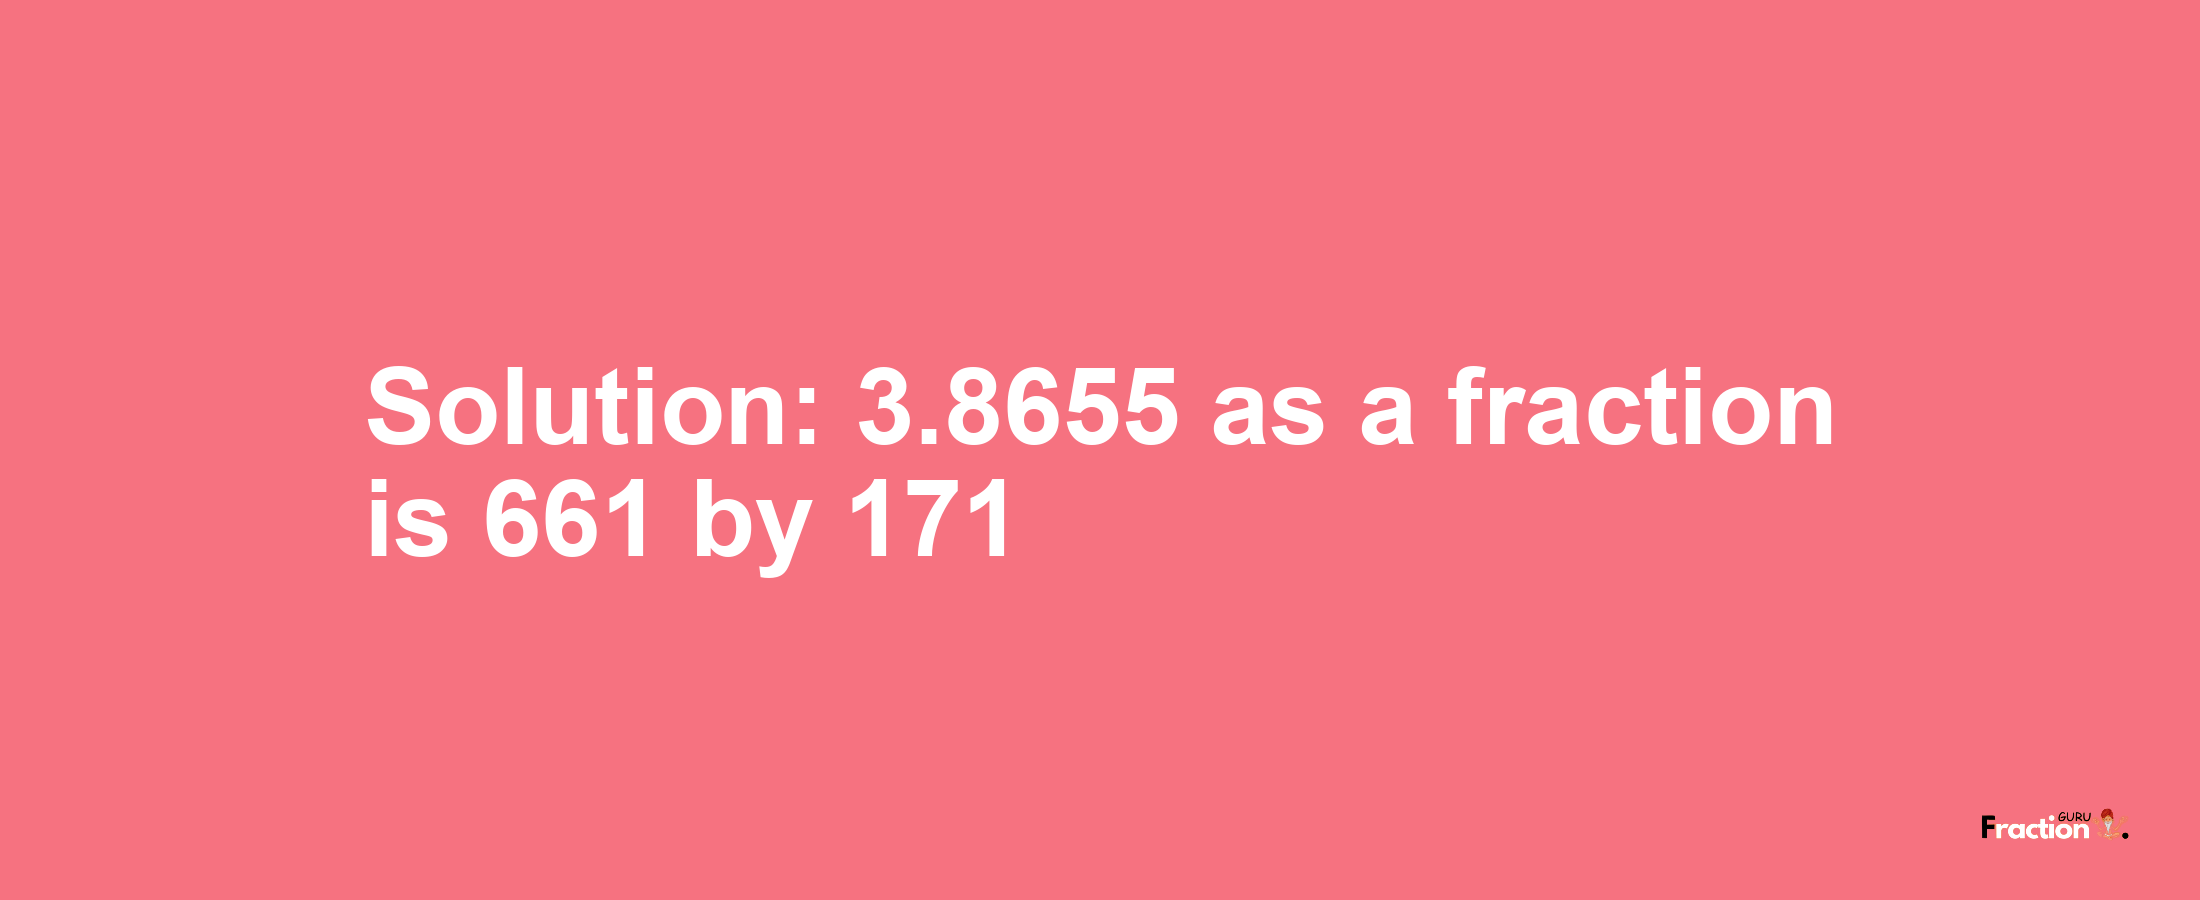 Solution:3.8655 as a fraction is 661/171